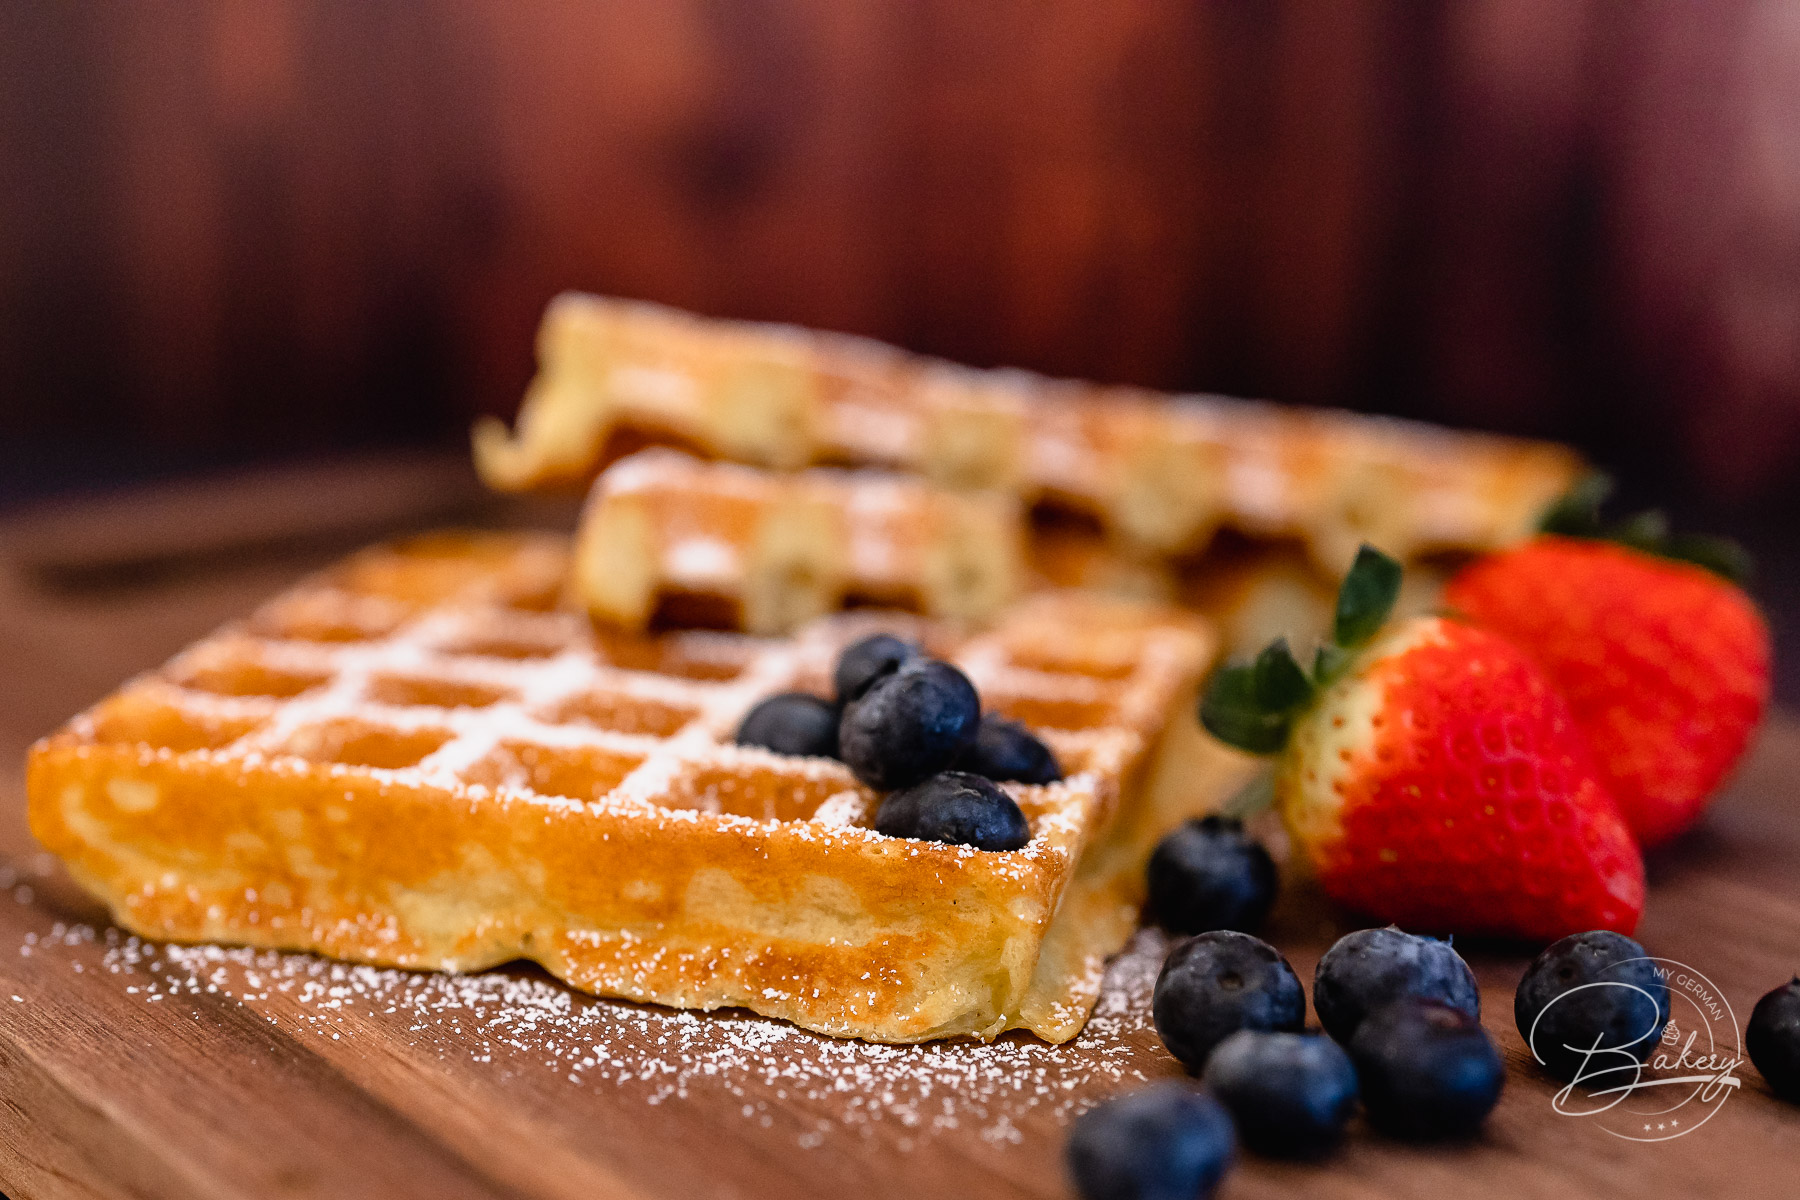 Belgian waffles recipe - easy waffle batter - 10 waffles - delicious waffle batter - Quick and easy recipe for Belgian waffles and delicious waffle batter. Crunchy on the outside and soft on the inside, chewy with flour, milk, eggs.